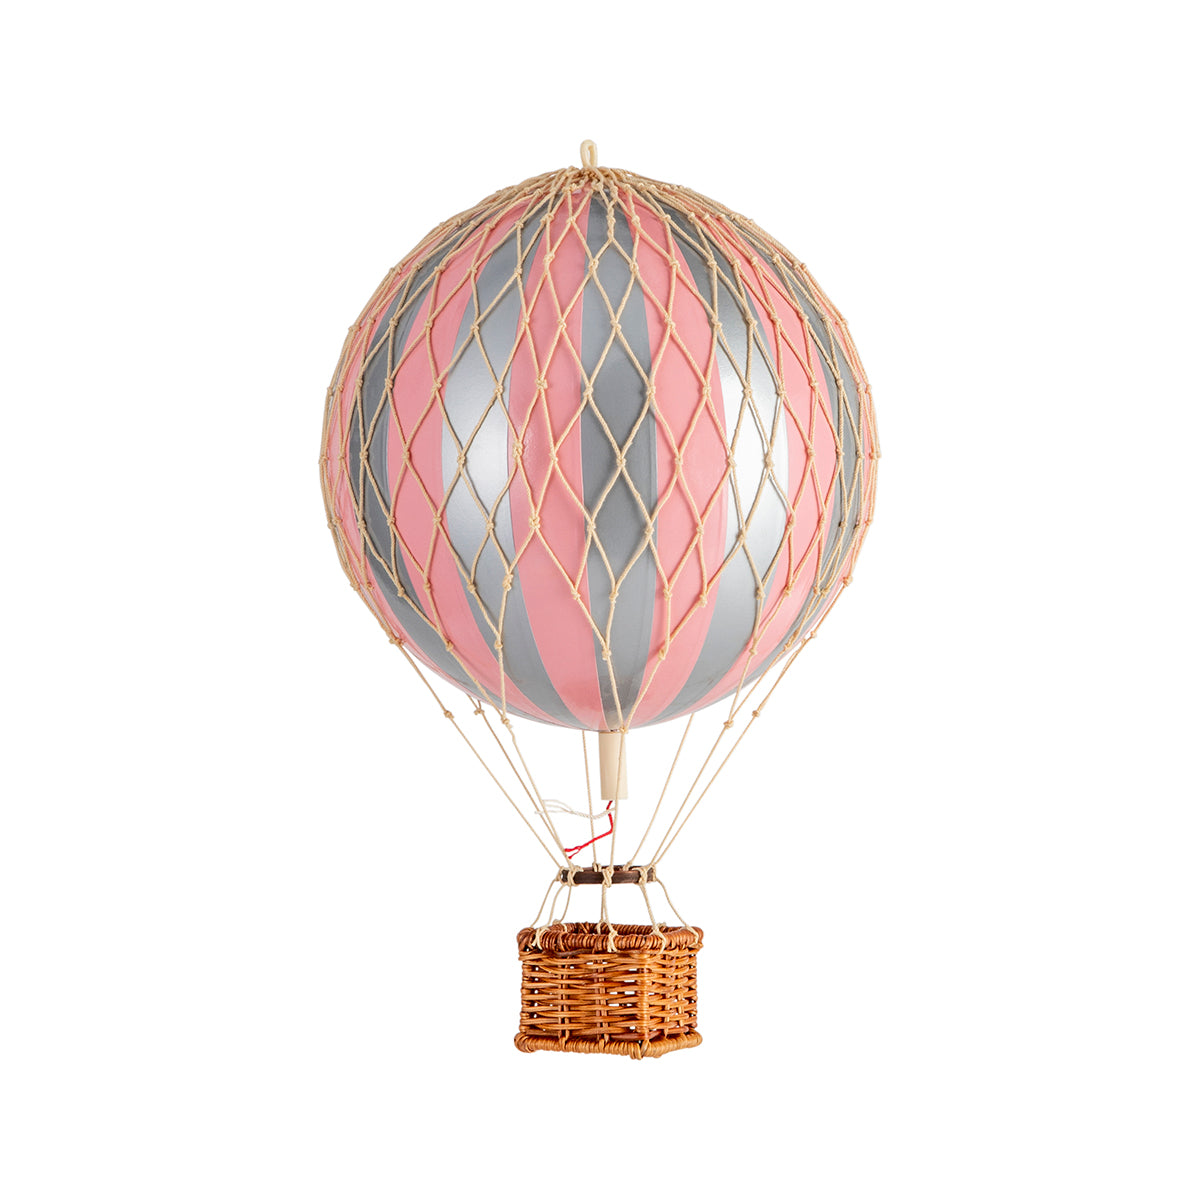 A Wonderen Small Hot Air Balloon - Travels Light with a pink and silver design floats against a white background.